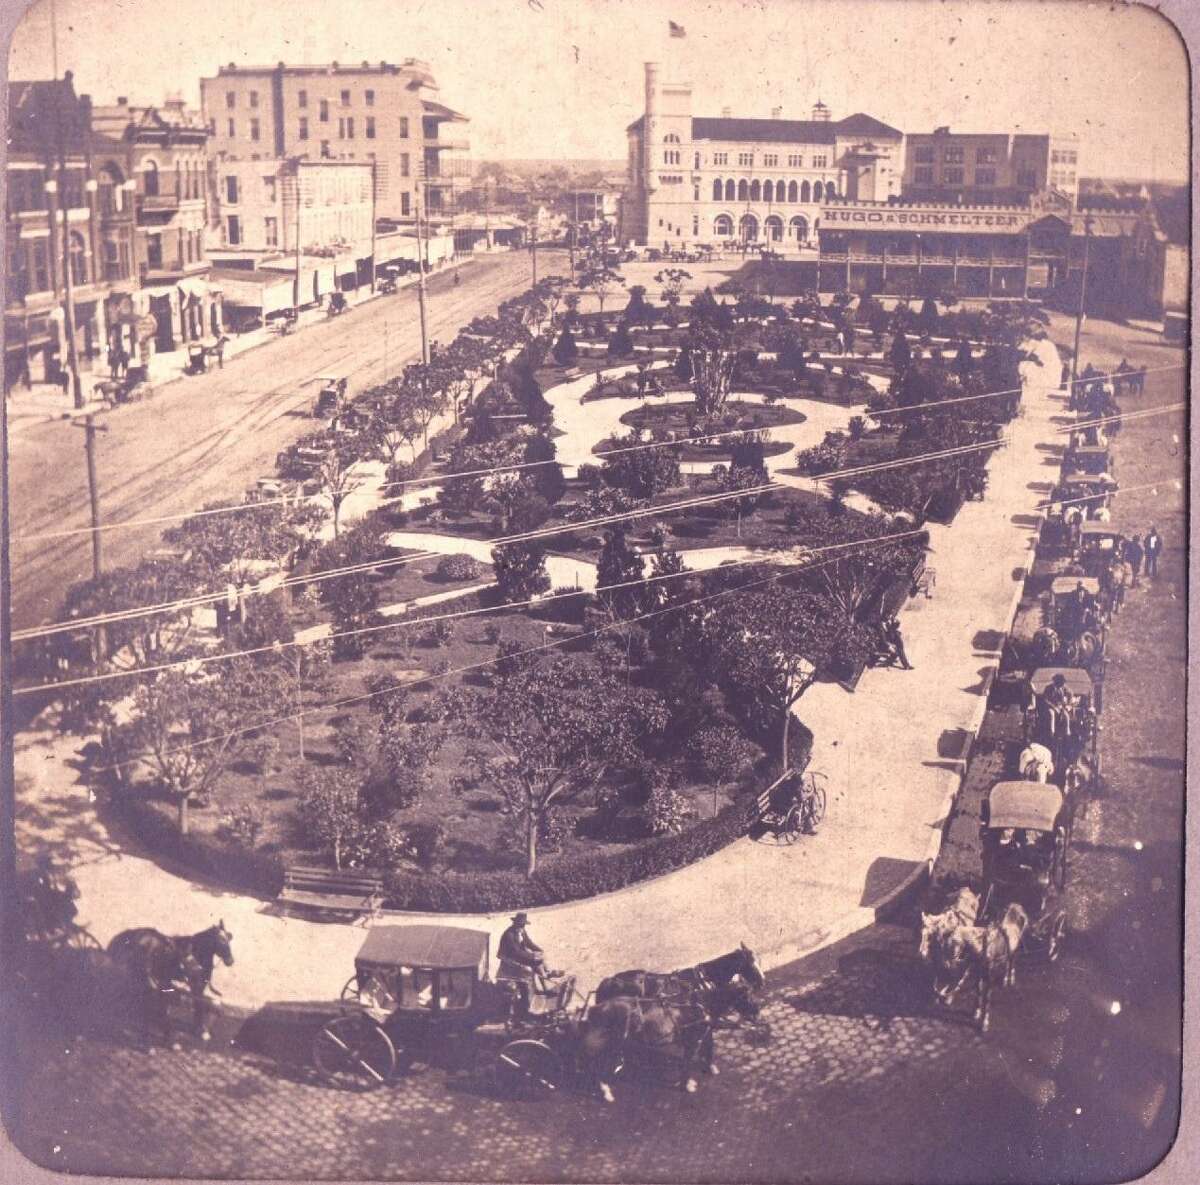 Buggies and carriages circle Alamo Plaza in 1905, waiting for riders. That was the year thata the Texas Legislature passed a bill to buy the Long Barrack to protect it from commercial interests and deterioration, and named the DRT as custodian of the Alamo.